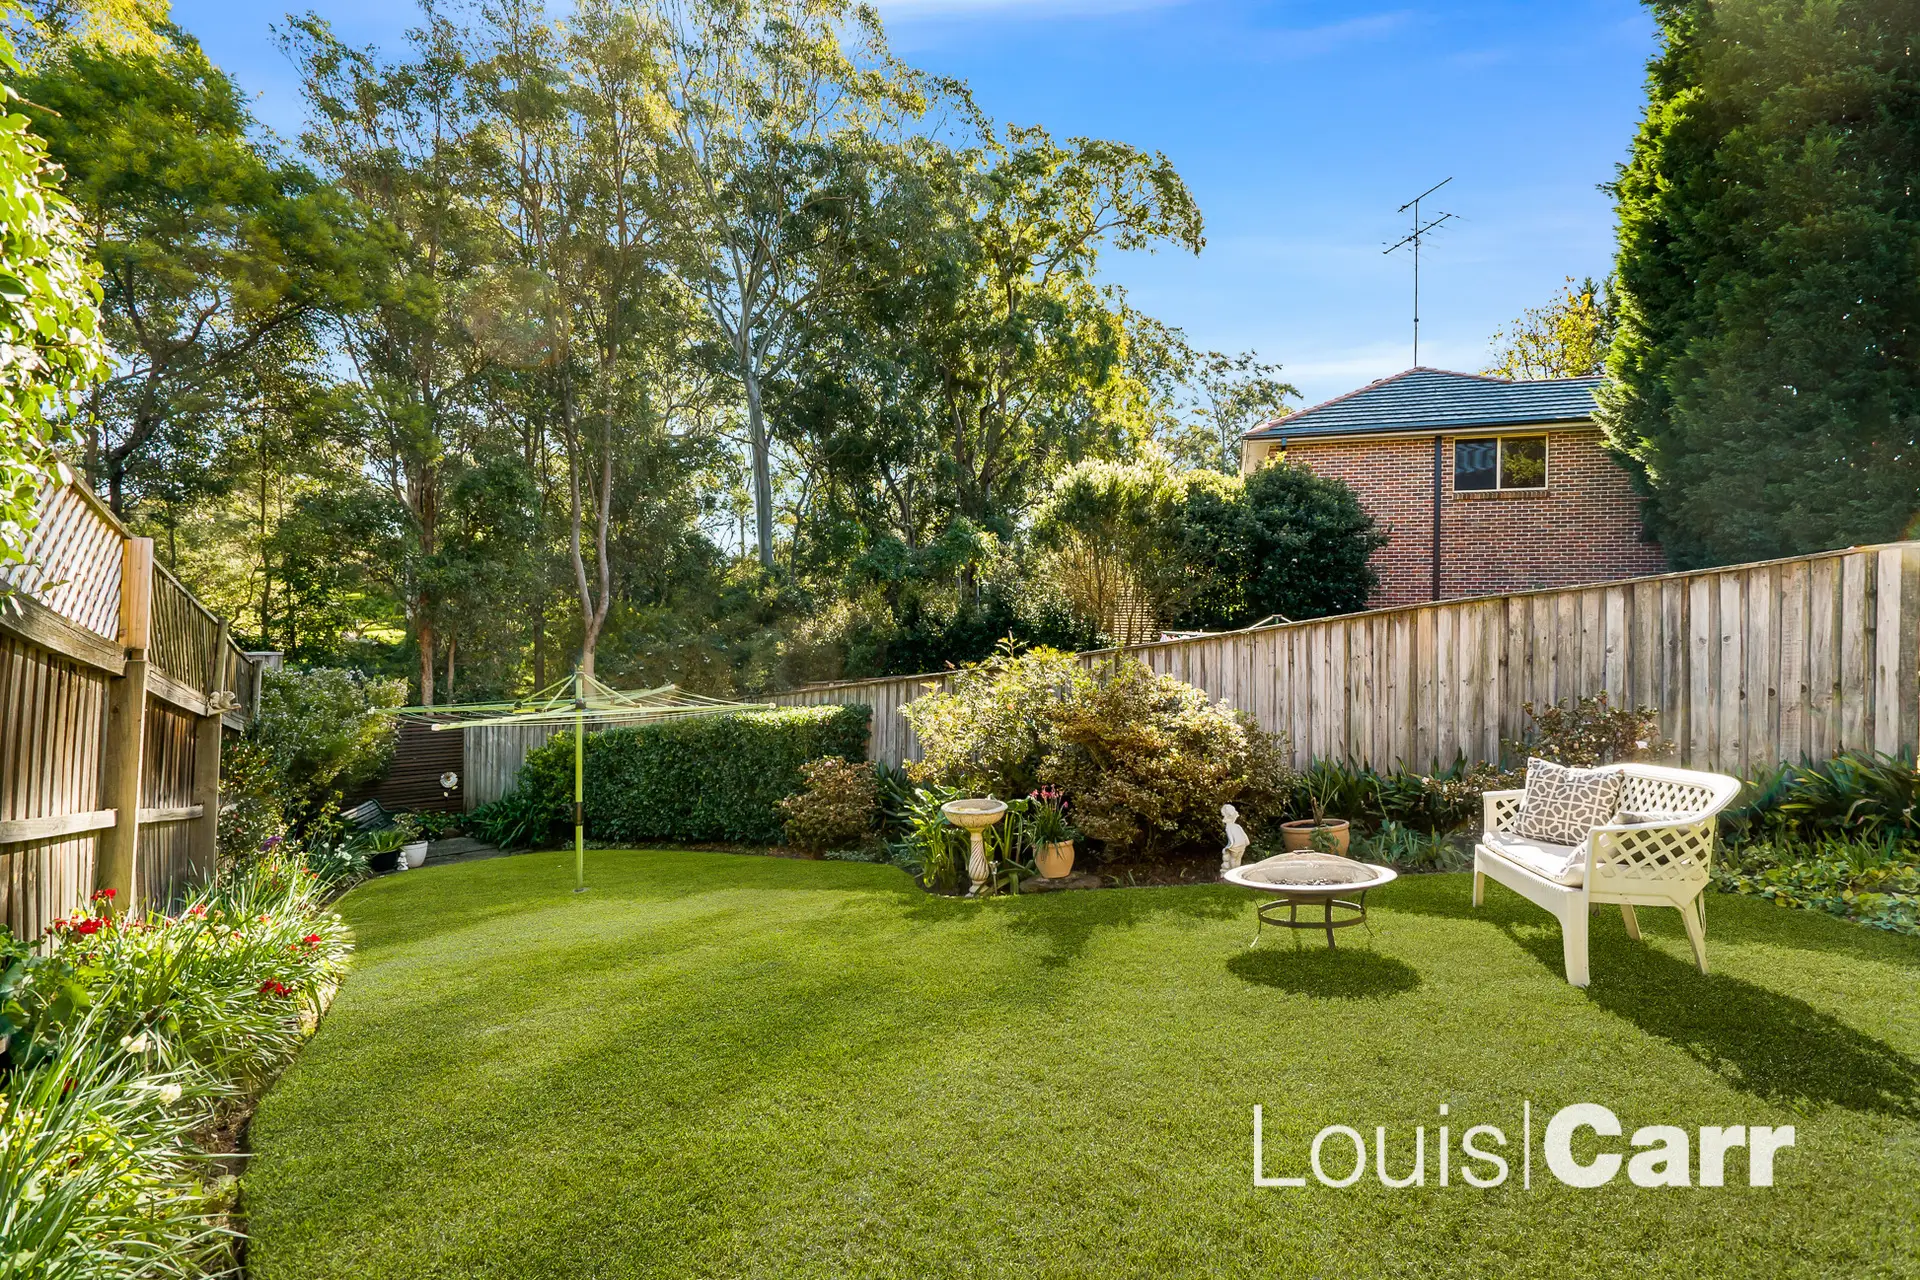 Photo #2: 1/51 Darlington Drive, Cherrybrook - Sold by Louis Carr Real Estate